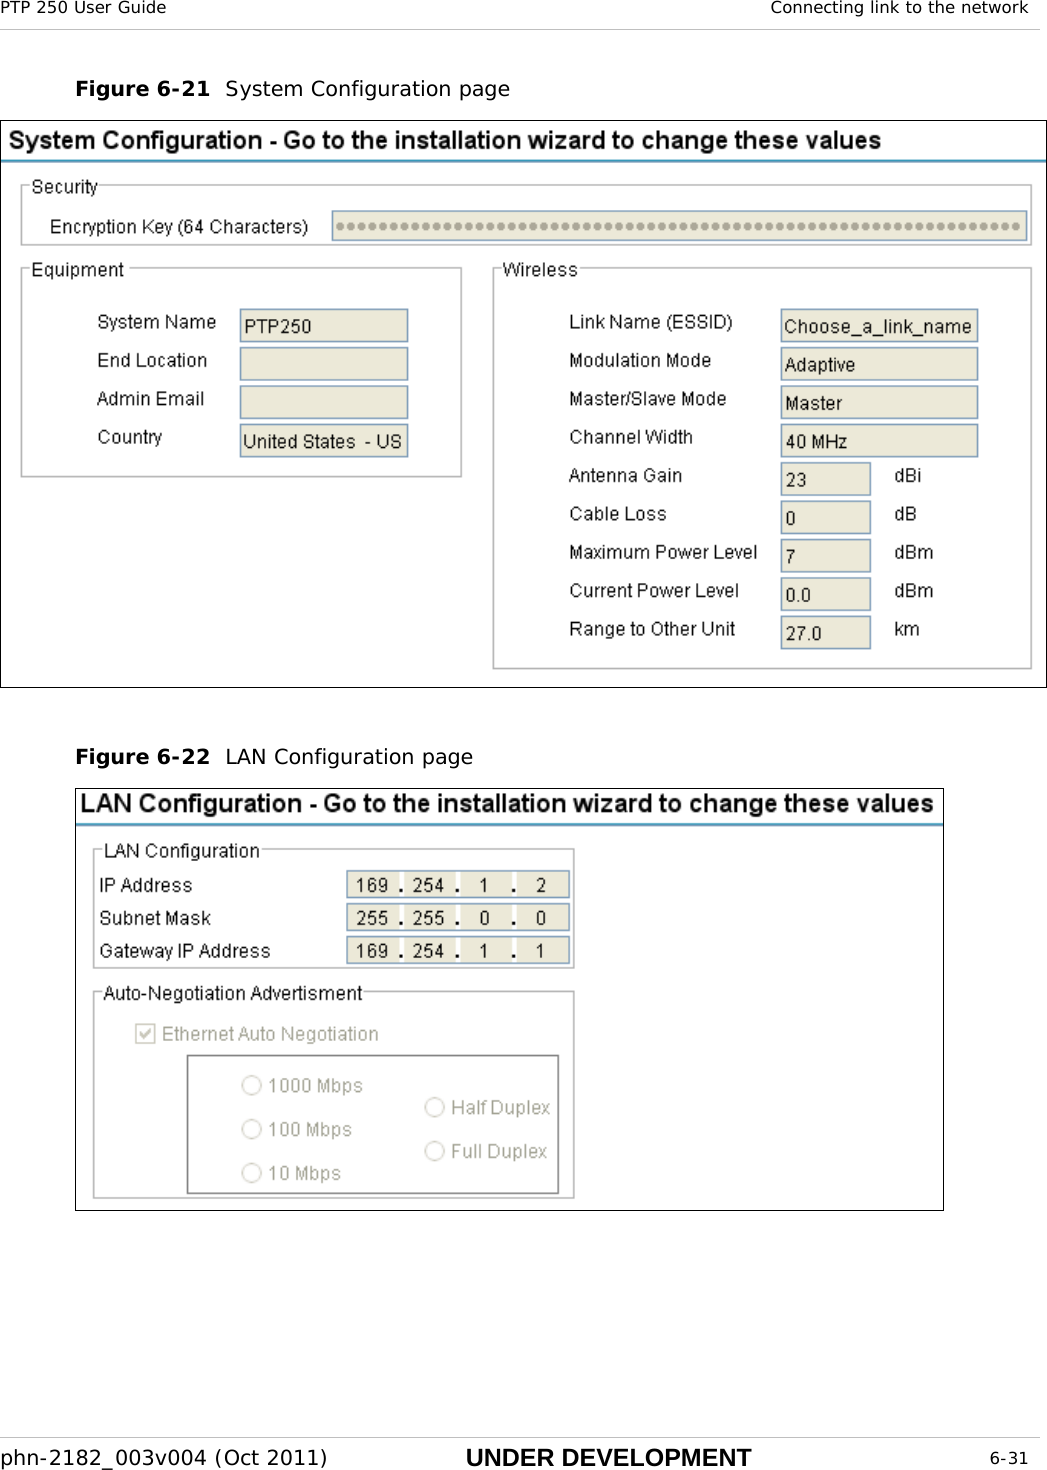 PTP 250 User Guide  Connecting link to the network  phn-2182_003v004 (Oct 2011)  UNDER DEVELOPMENT  6-31  Figure 6-21  System Configuration page   Figure 6-22  LAN Configuration page  